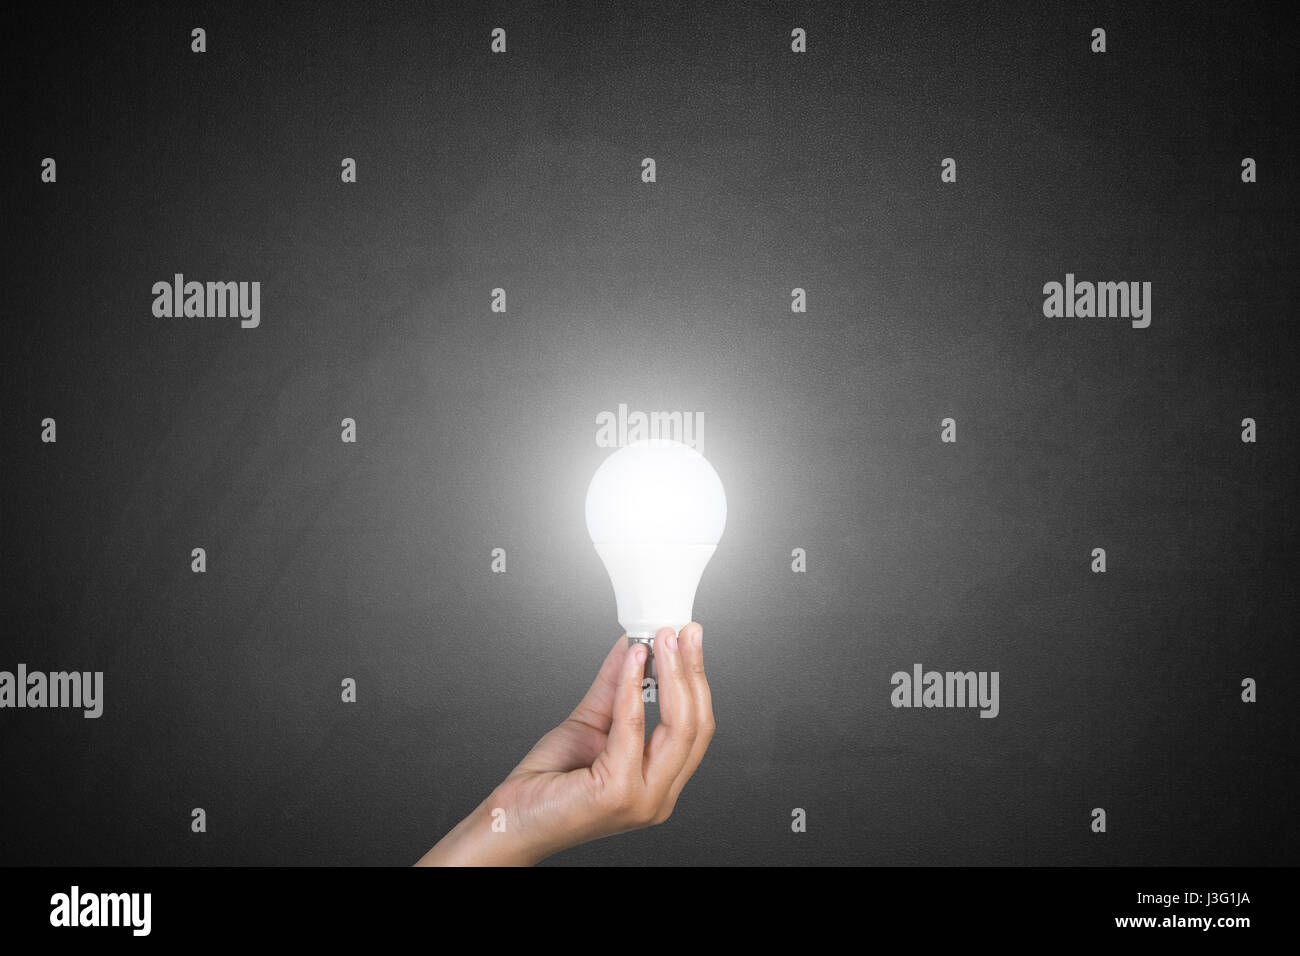 Woman hand holding Light bulb in front of blackboard Banque D'Images